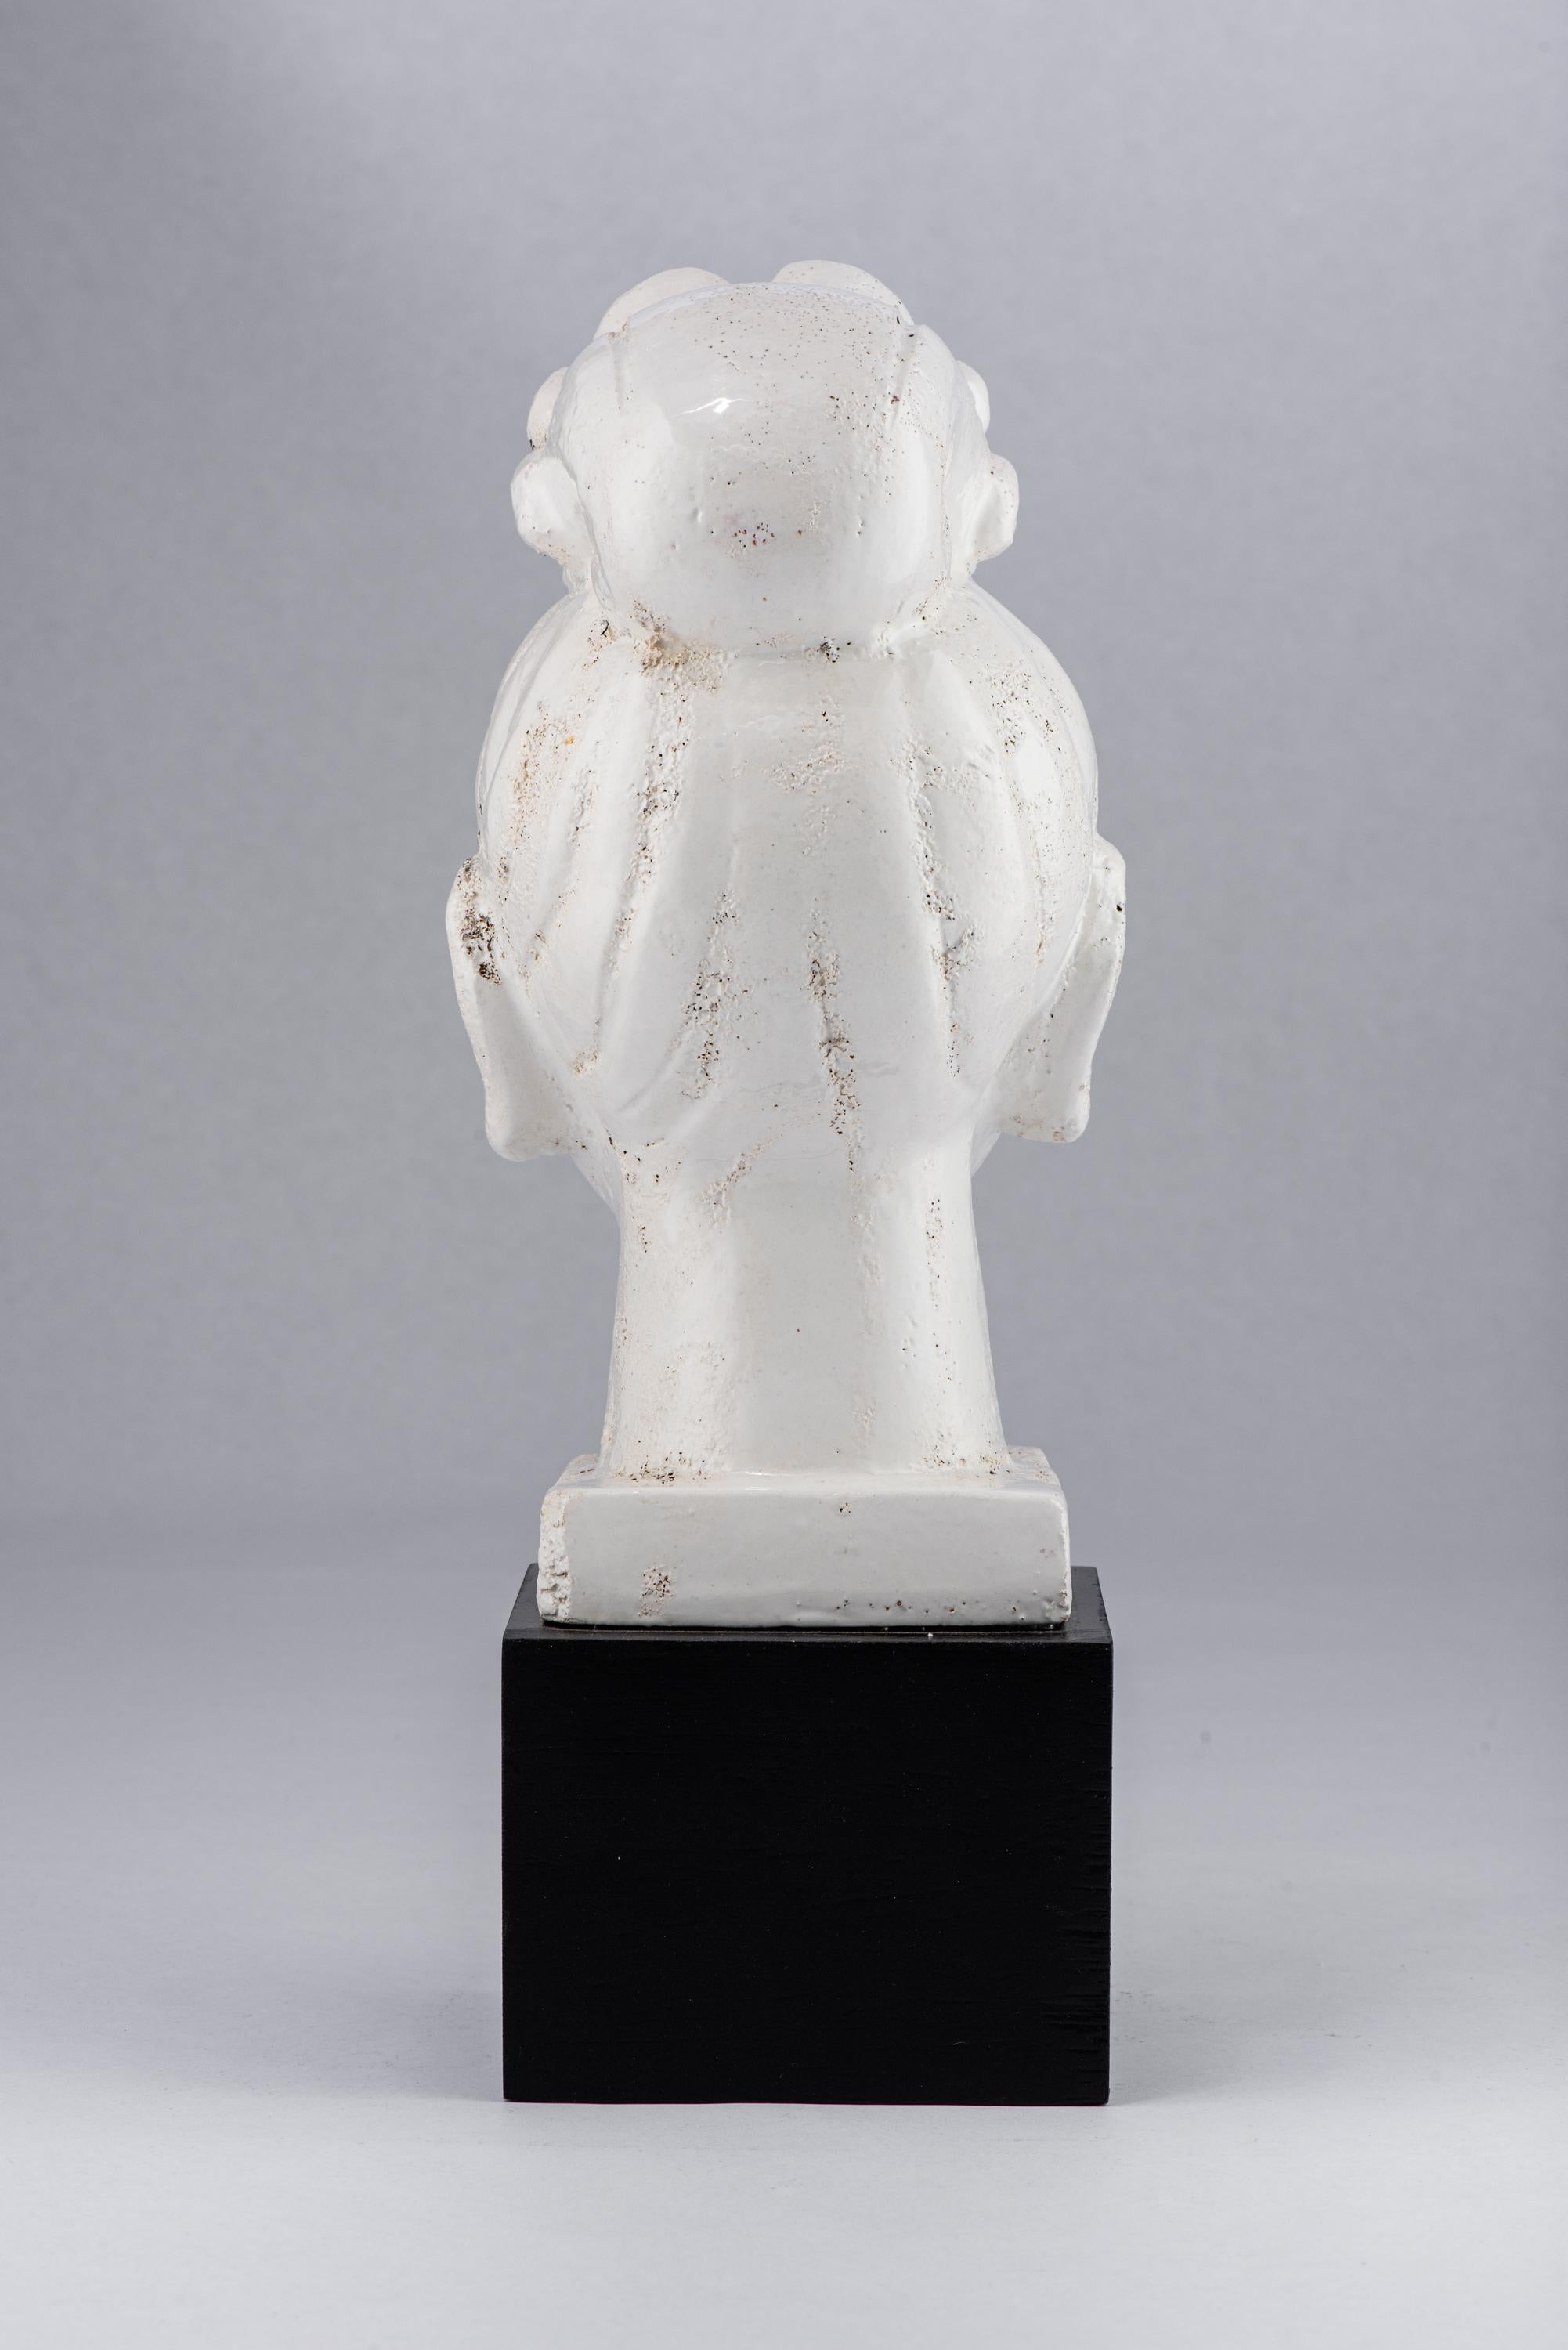 Bitossi Kwan Yin Buddha, Ceramic, White, Black In Good Condition For Sale In New York, NY